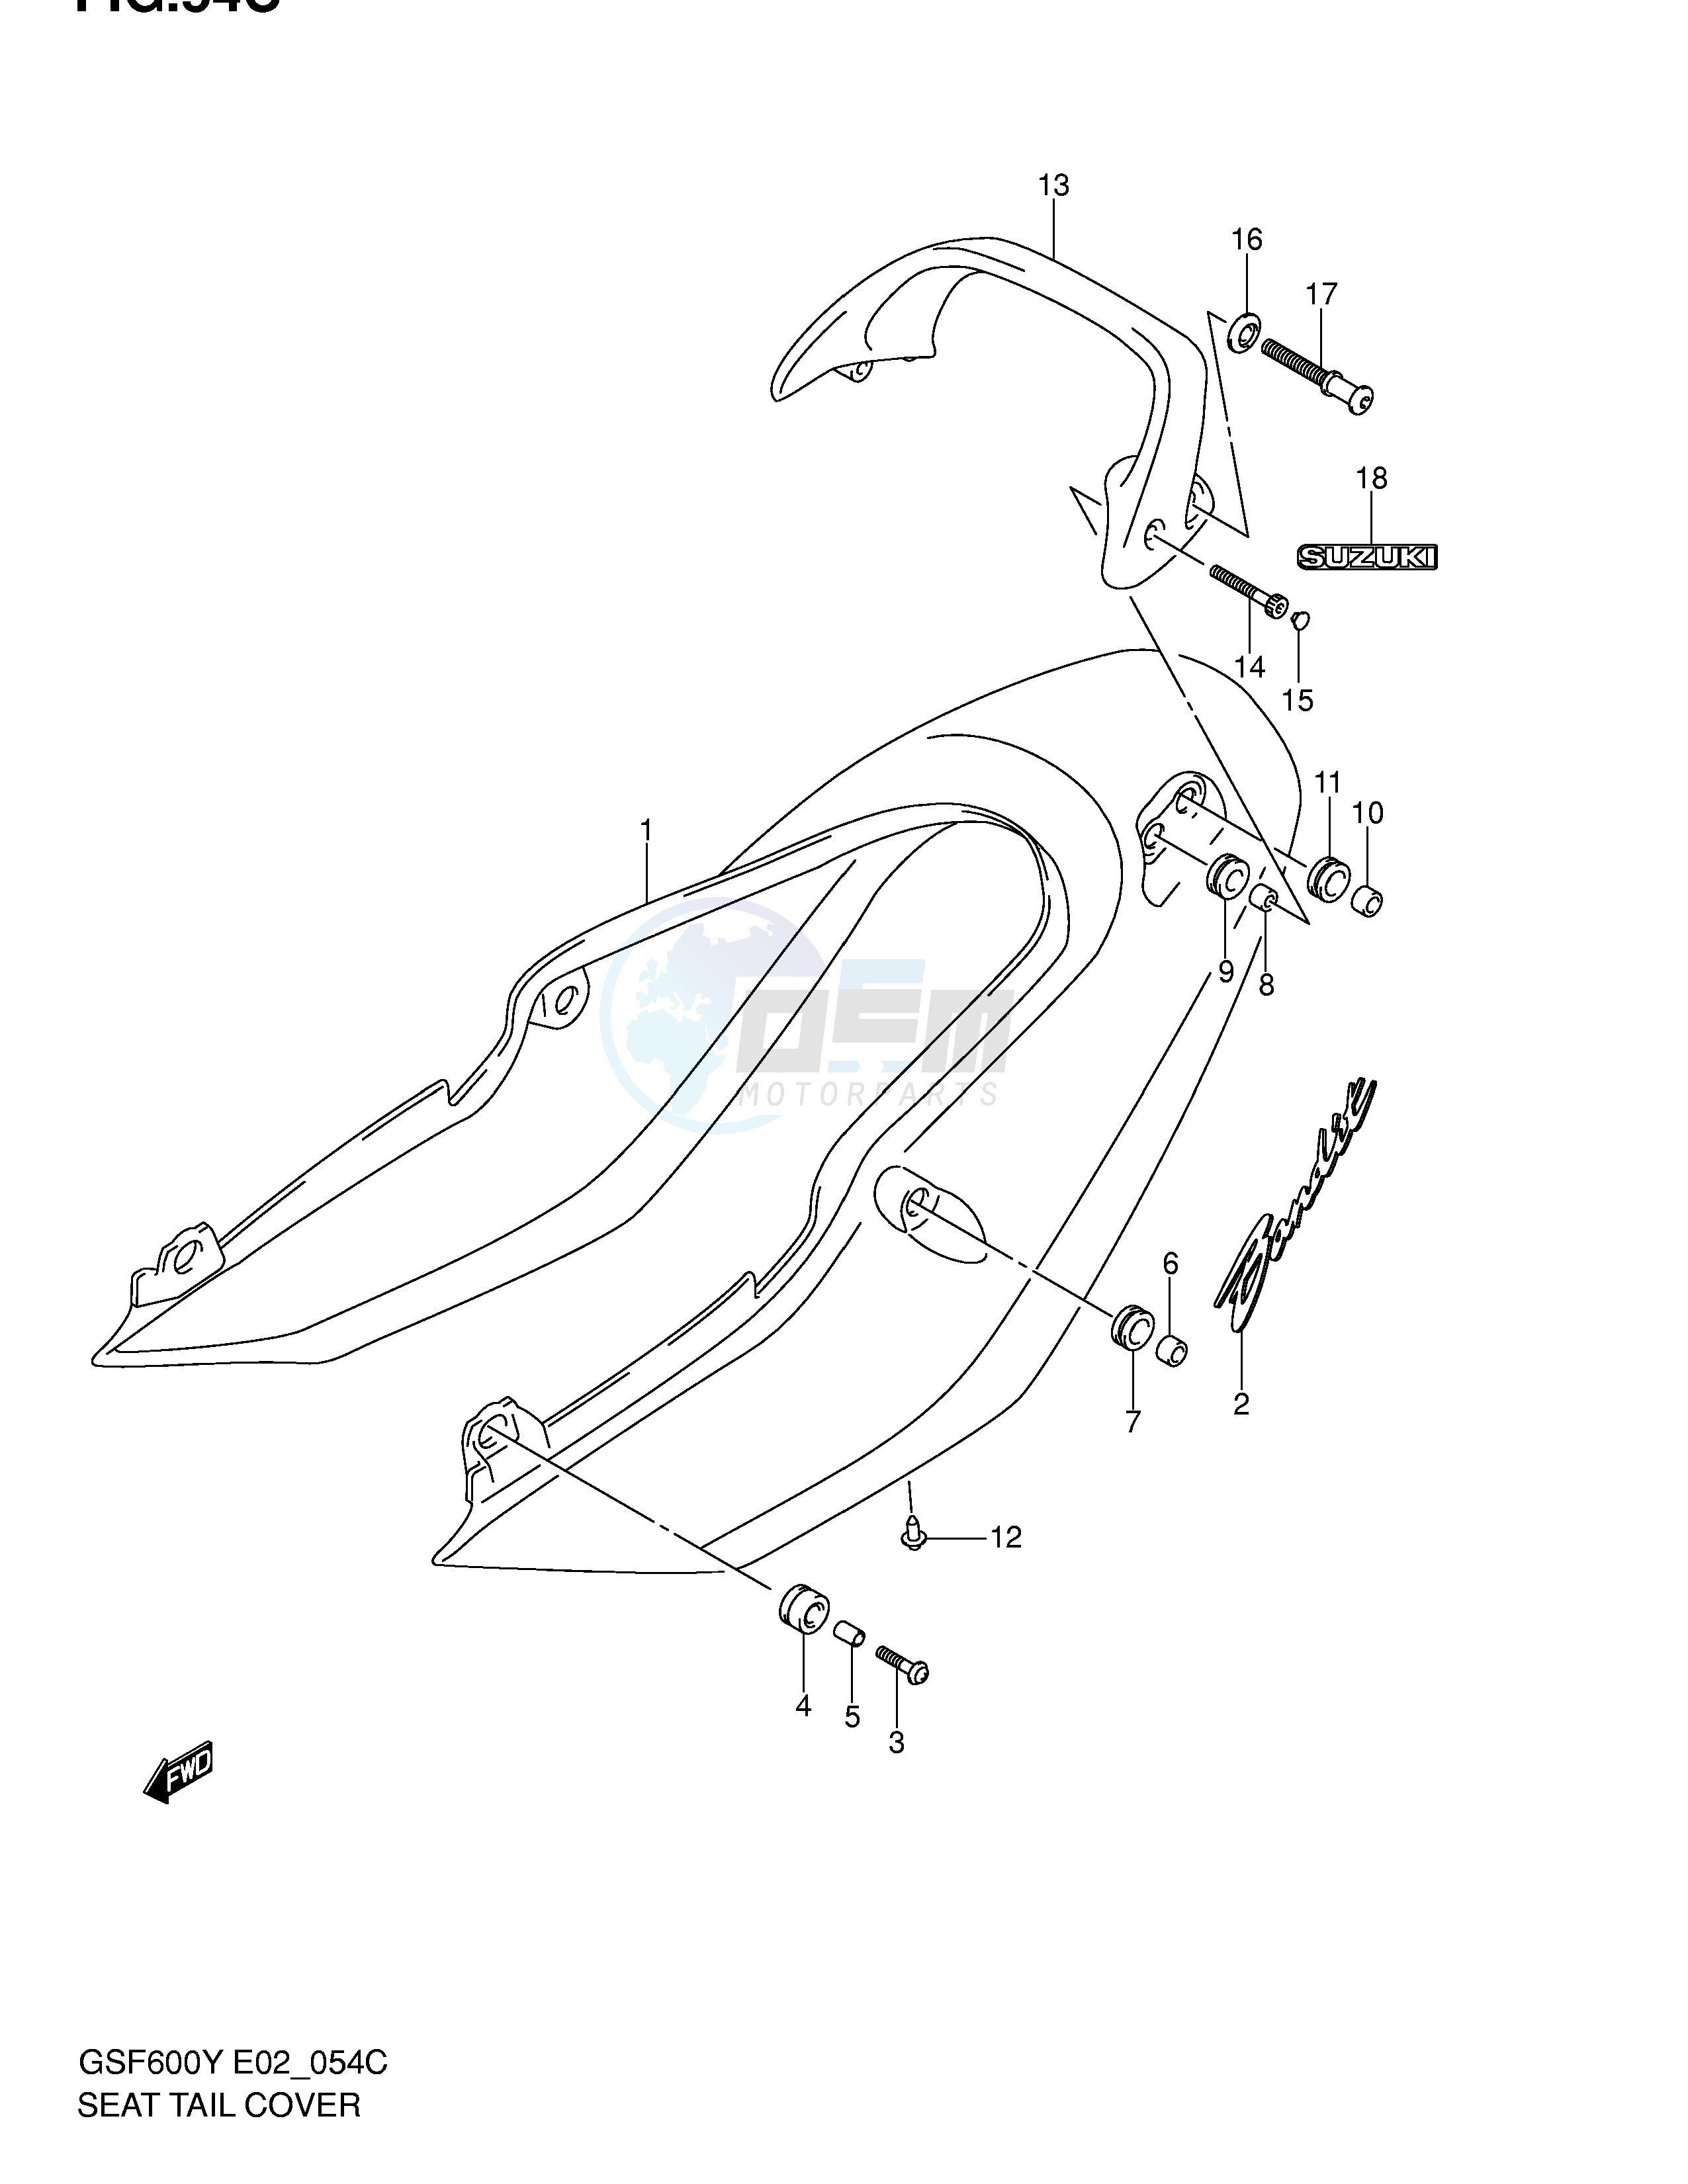 SEAT TAIL COVER (GSF600K2 UK2) blueprint